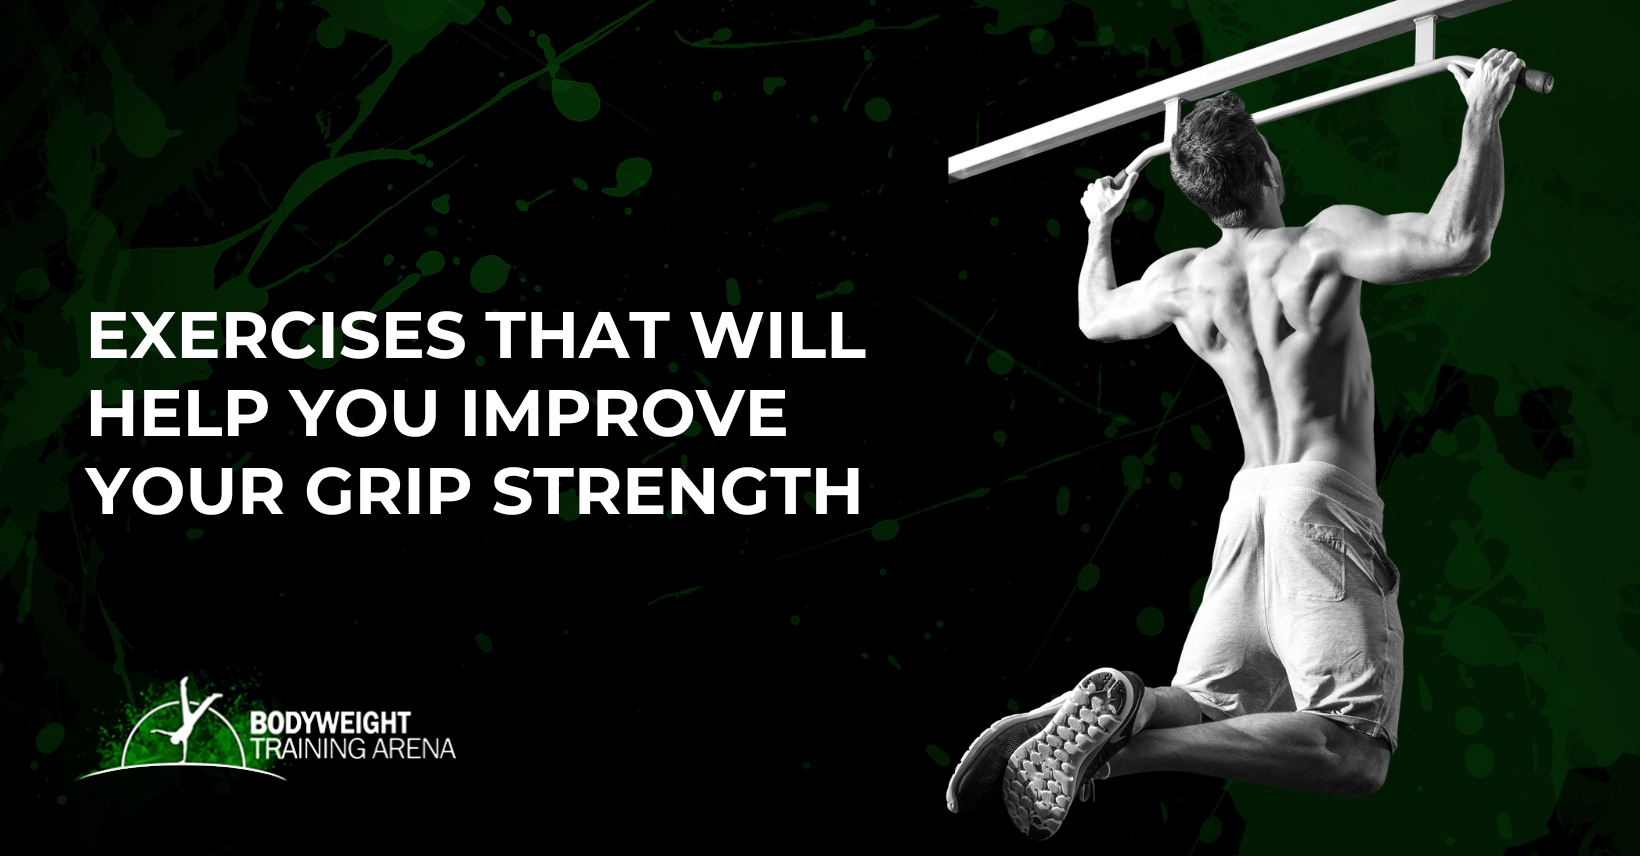 Exercises That Will Help You Improve Your Grip Strength